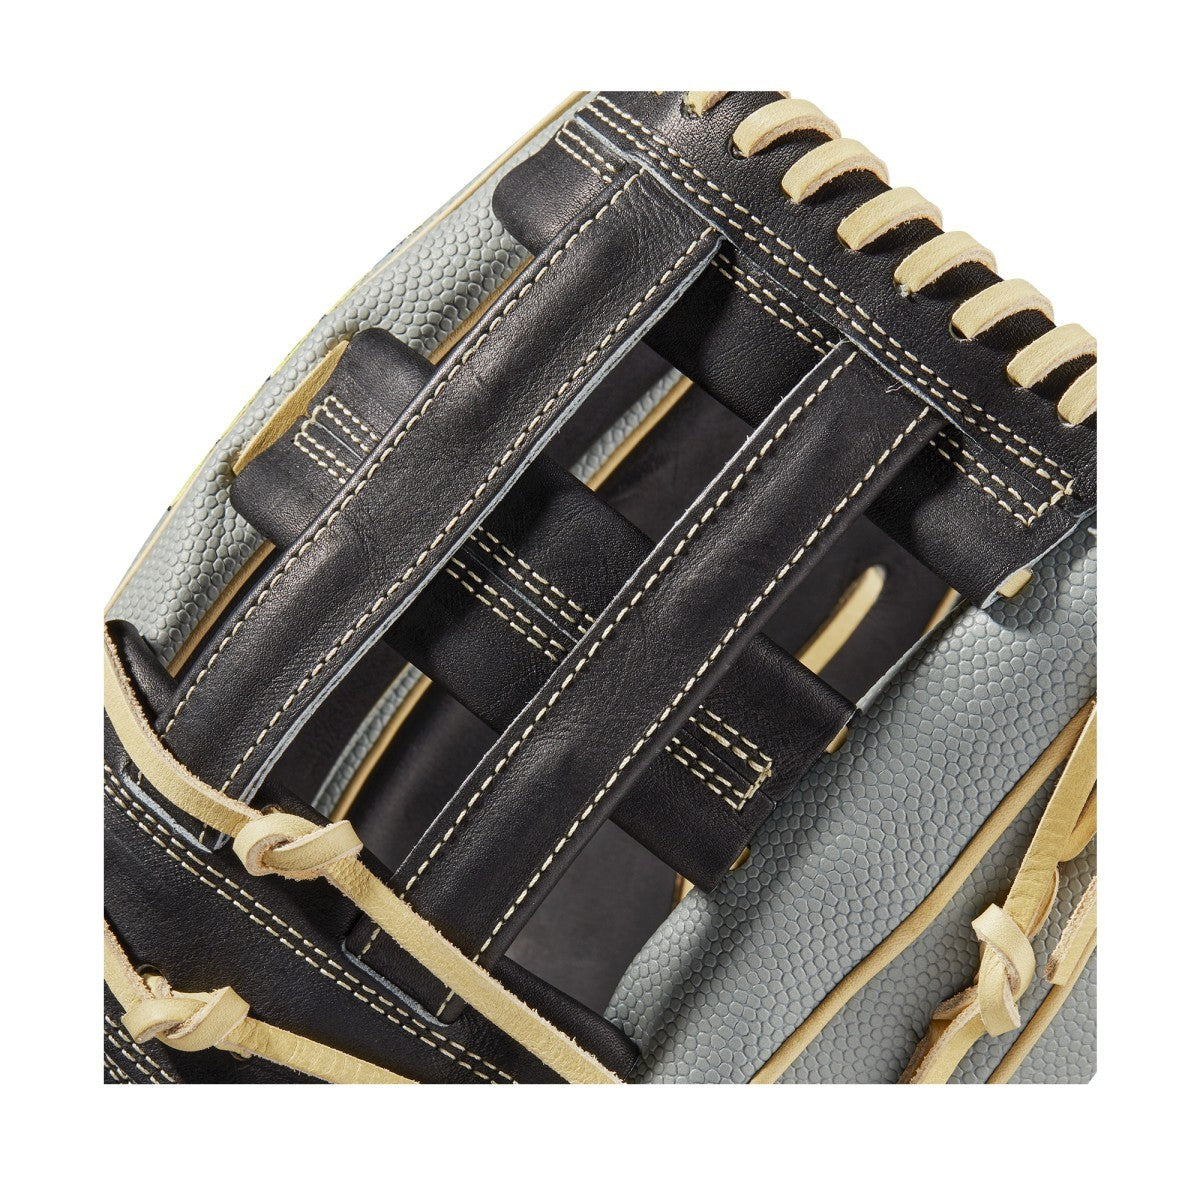 2021 A2000 1799SS 12.75" Outfield Baseball Glove | Midway Sports.